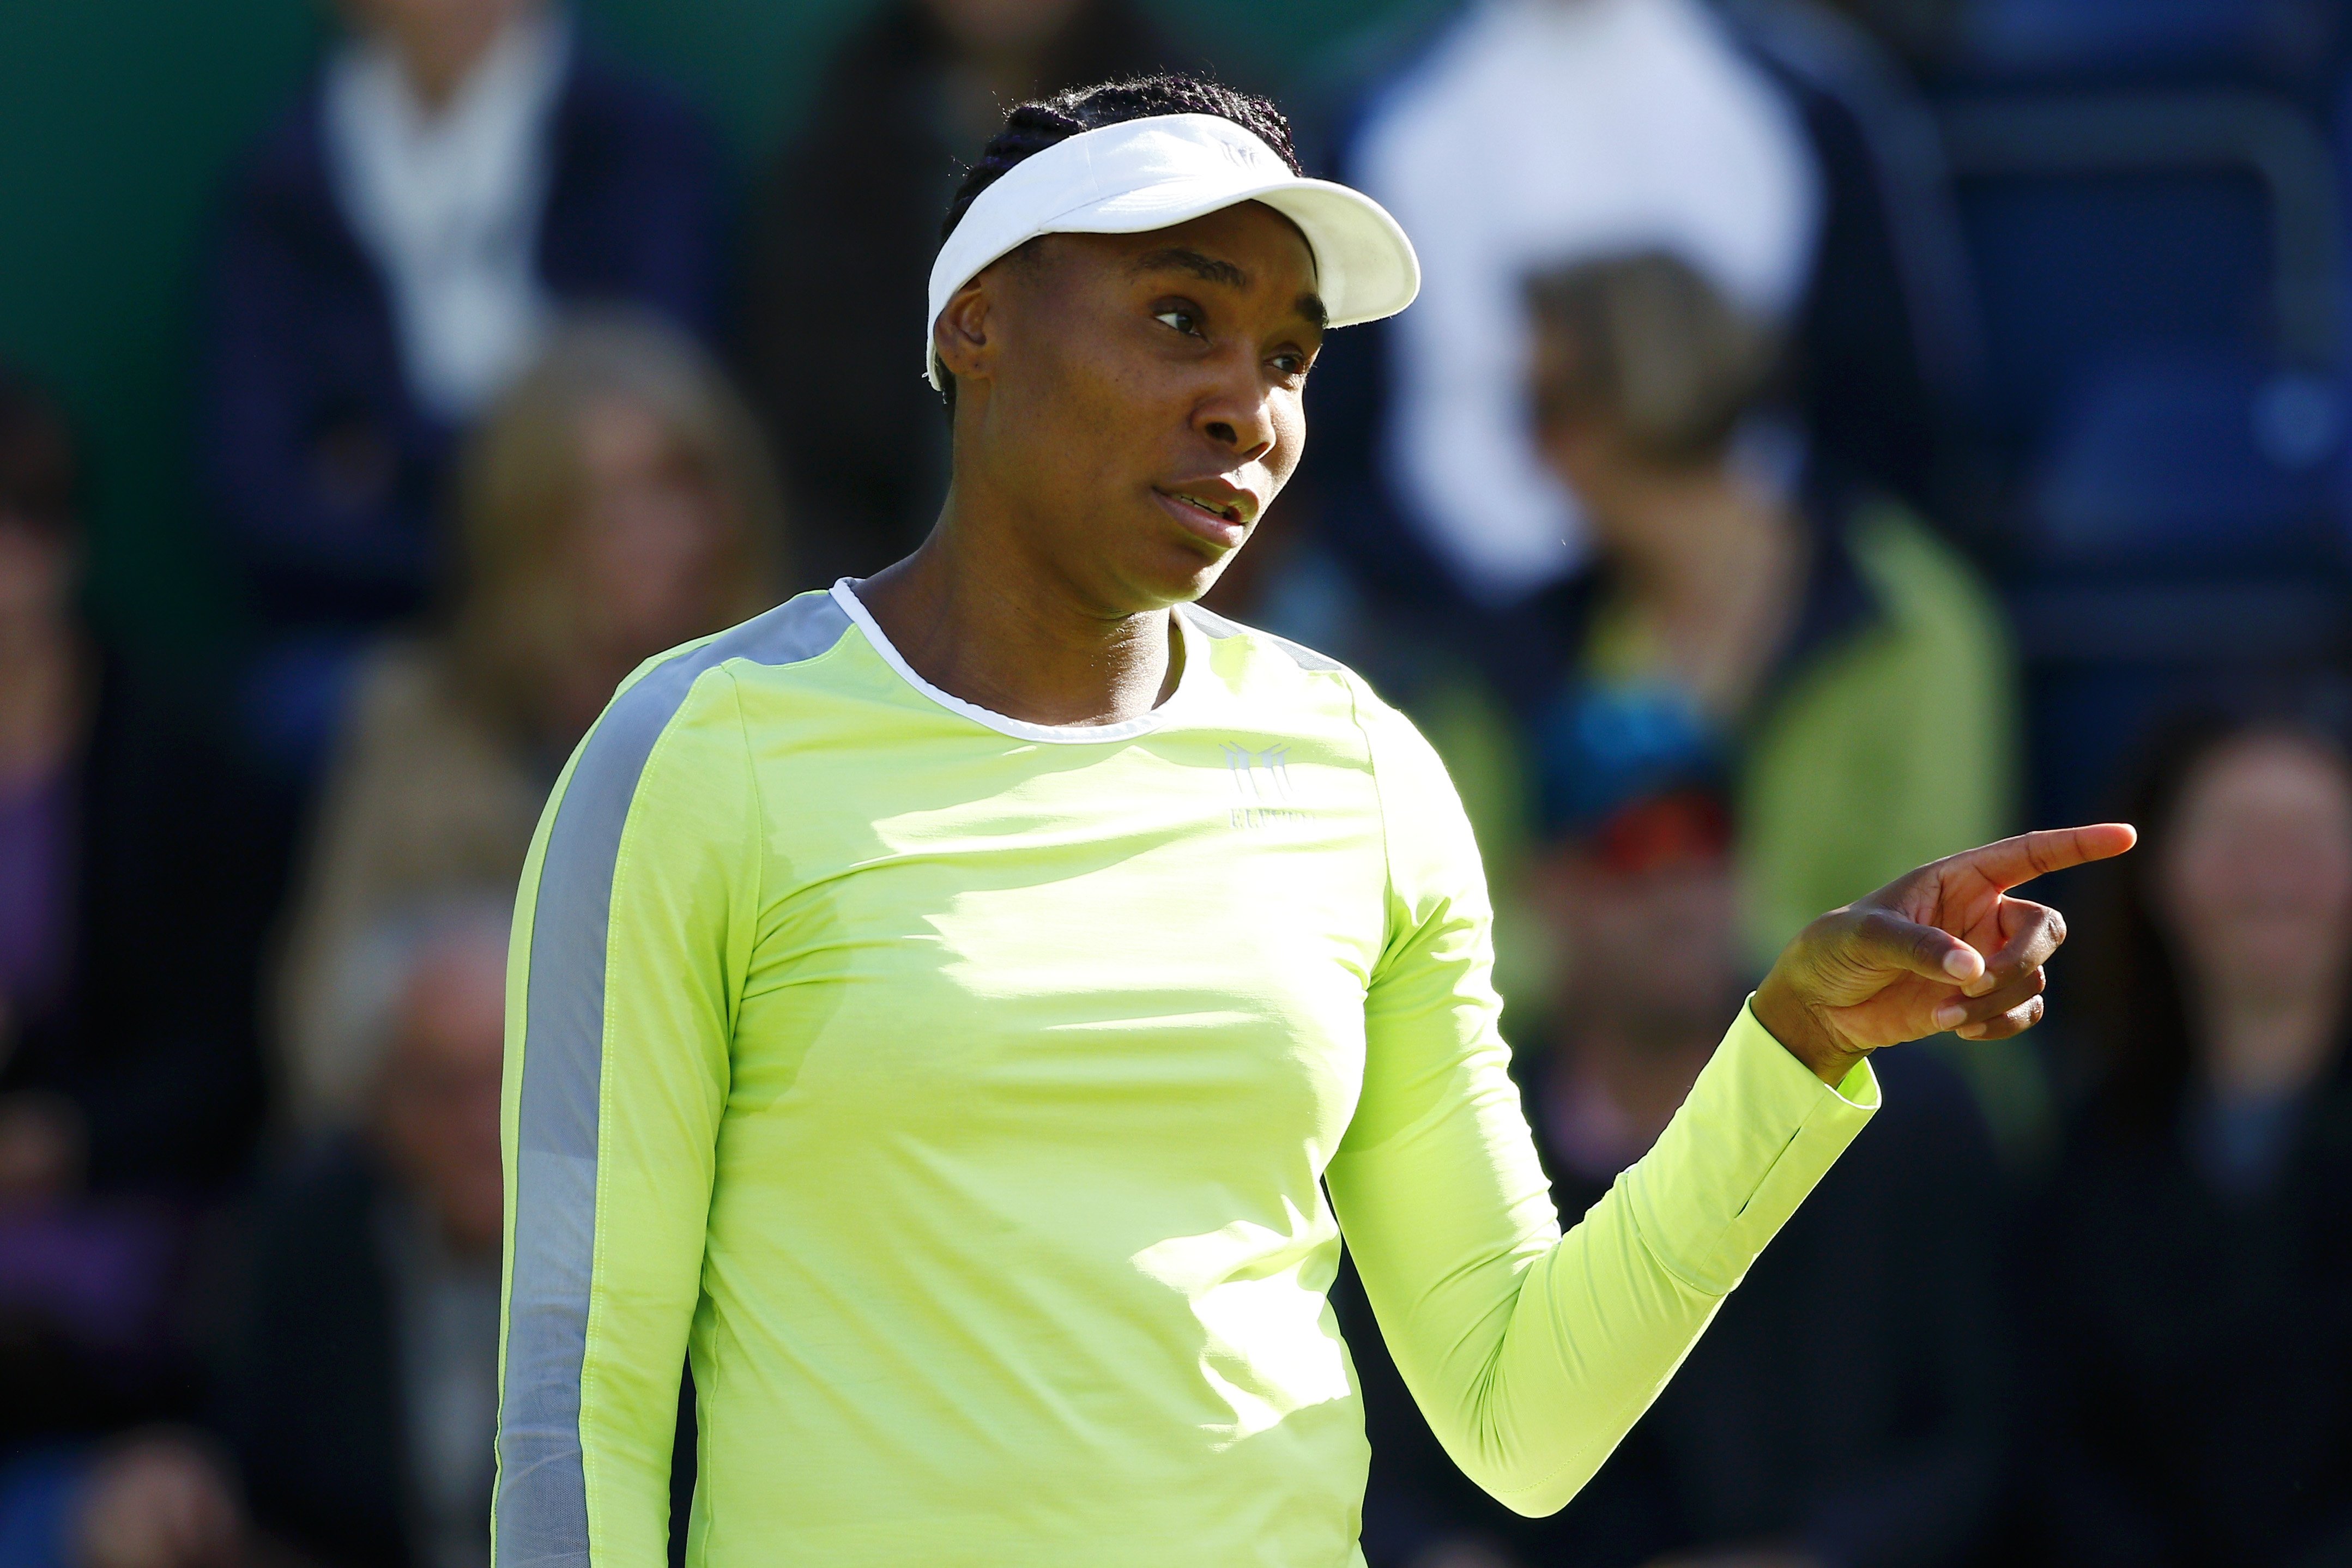 Venus Williams at the Nature Valley Classic at Edgbaston Priory Club in Birmingham, U.K. on on June 20, 2019. | Photo: Getty Images